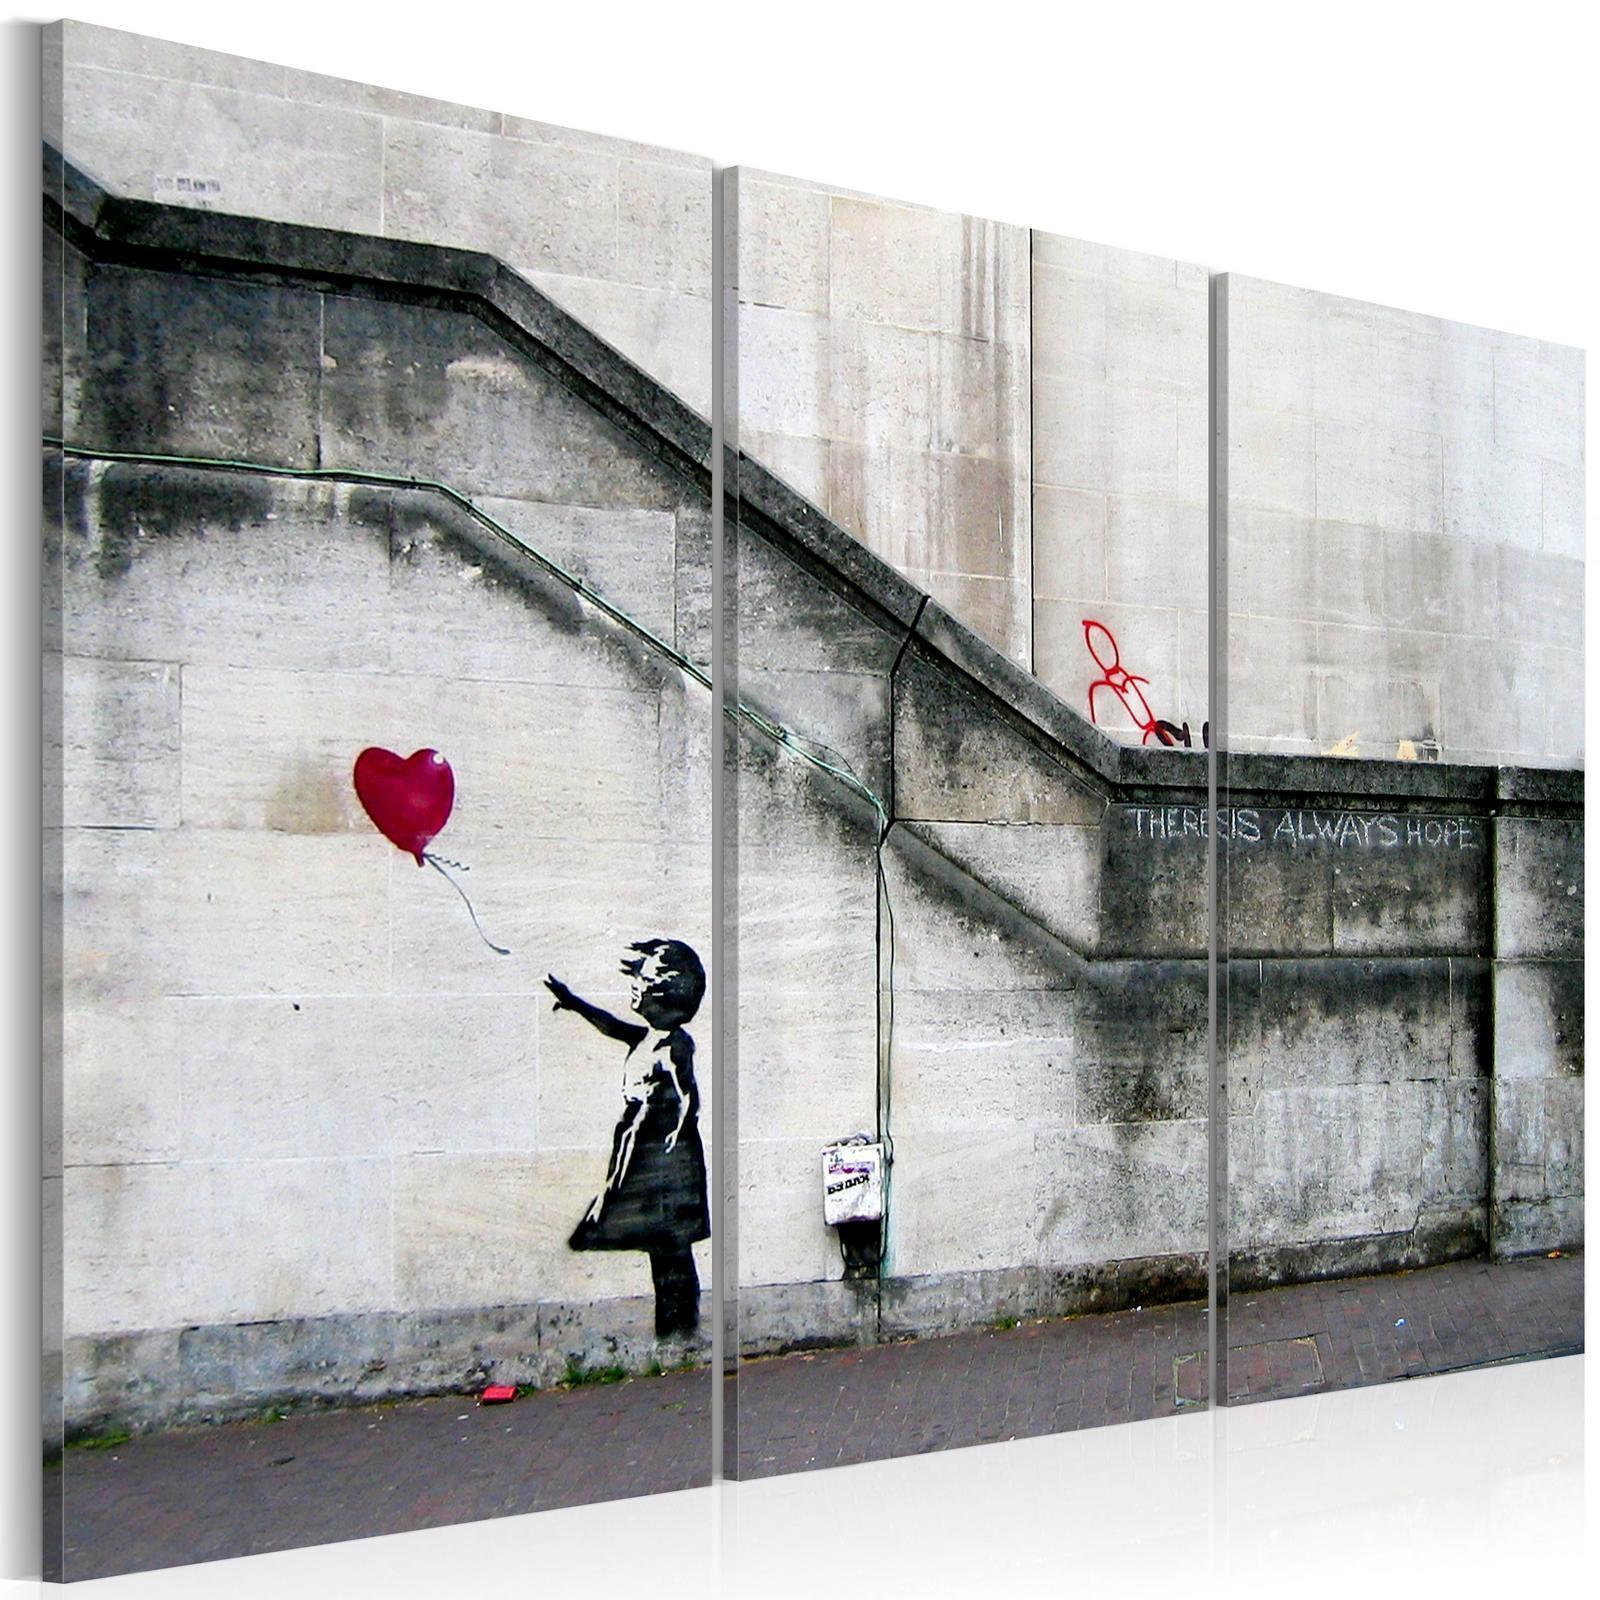 Tableau - Girl With a Balloon by Banksy